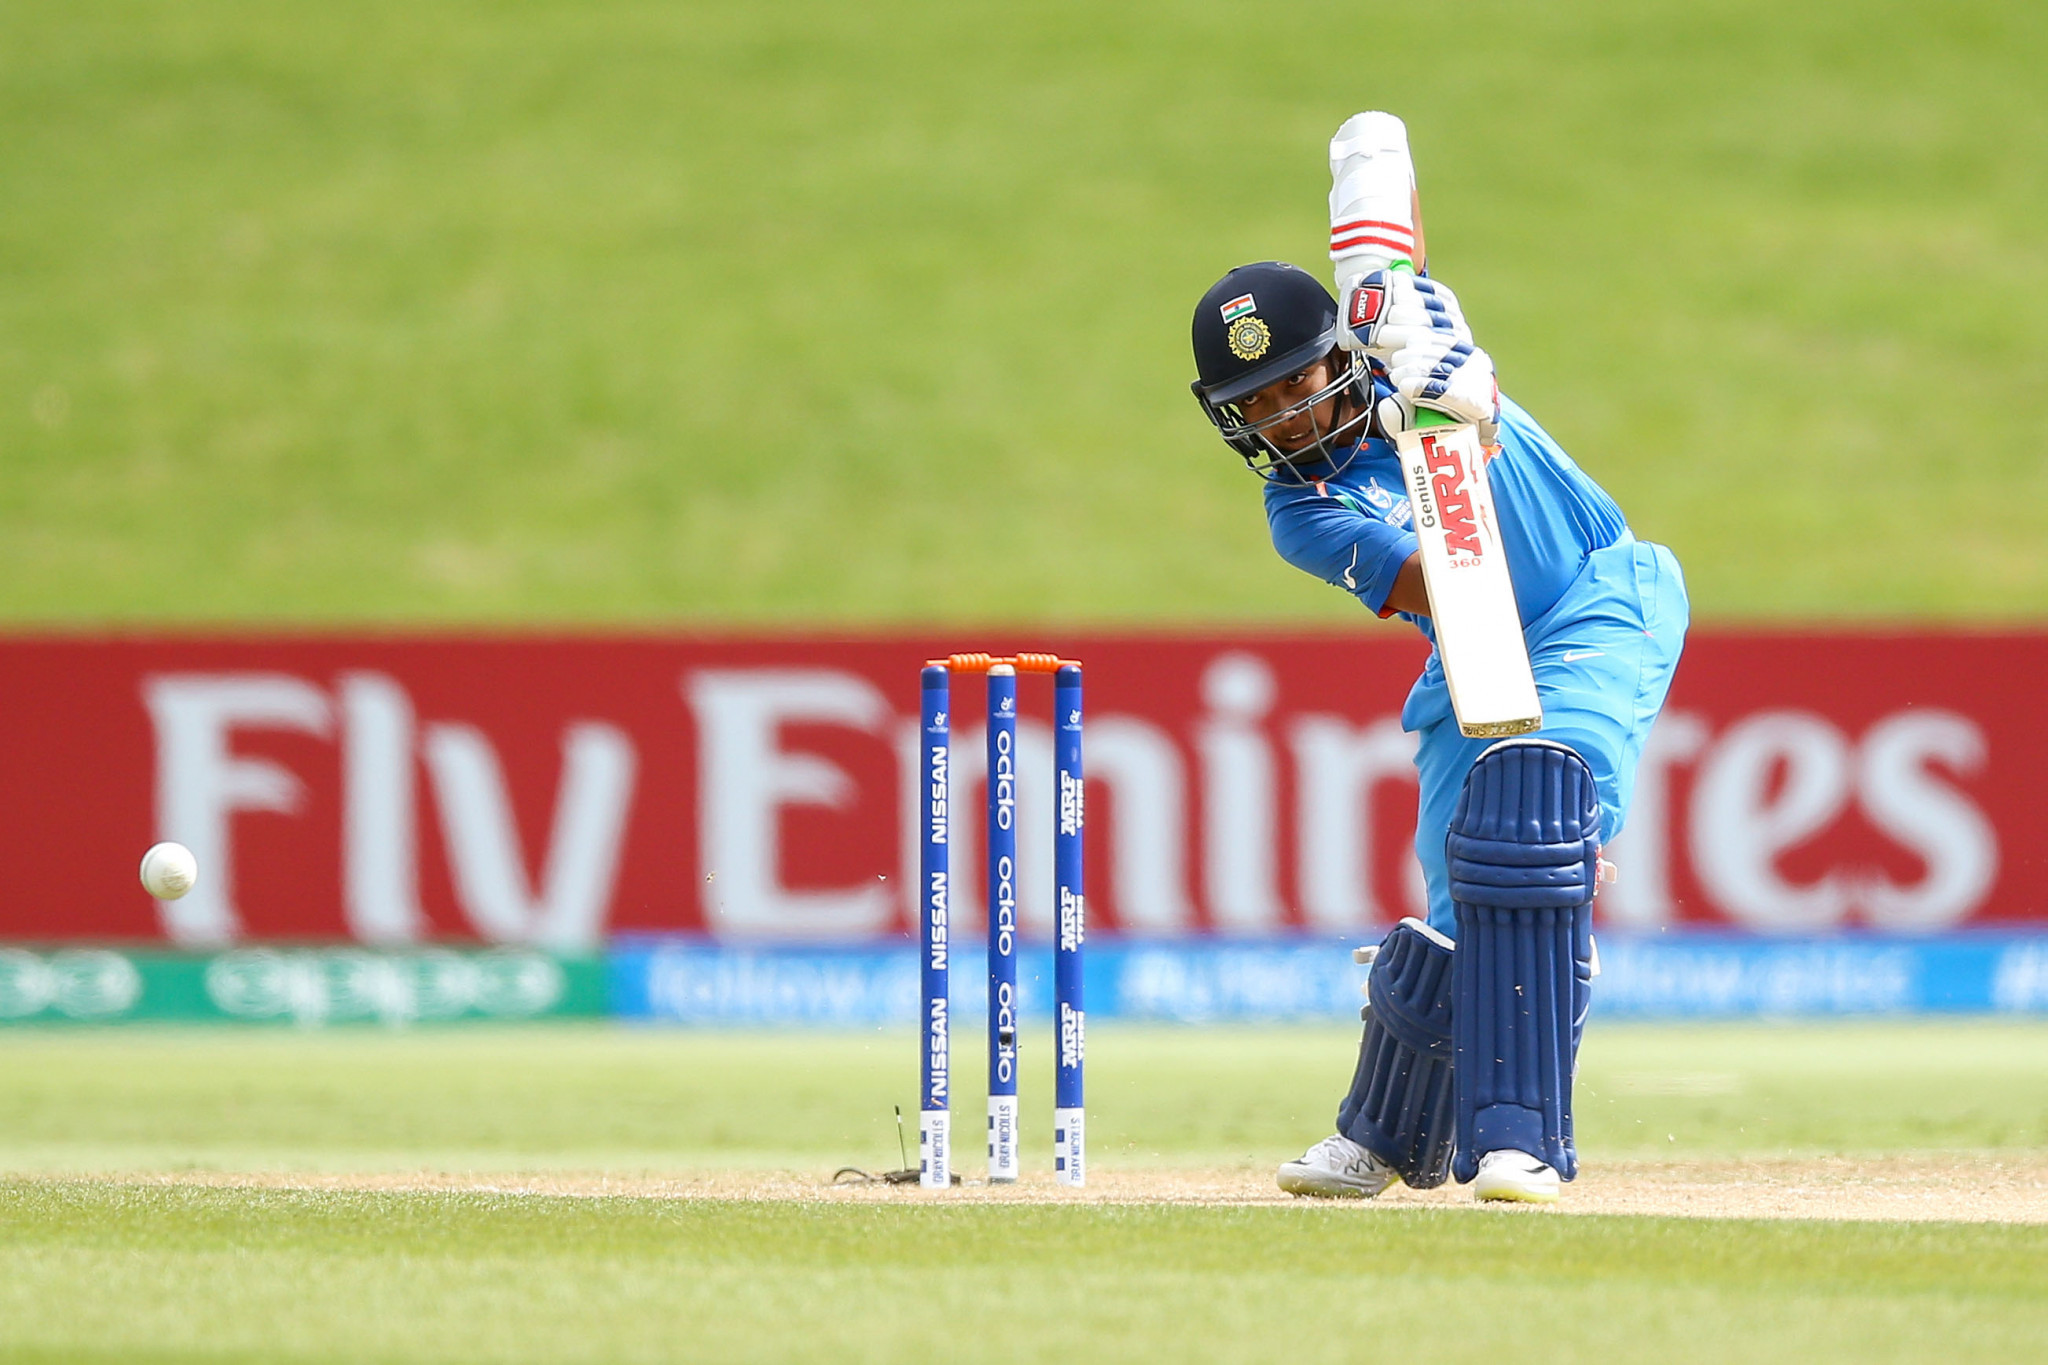 India reached the semi-finals after seeing off the challenge of Bangladesh ©Getty Images